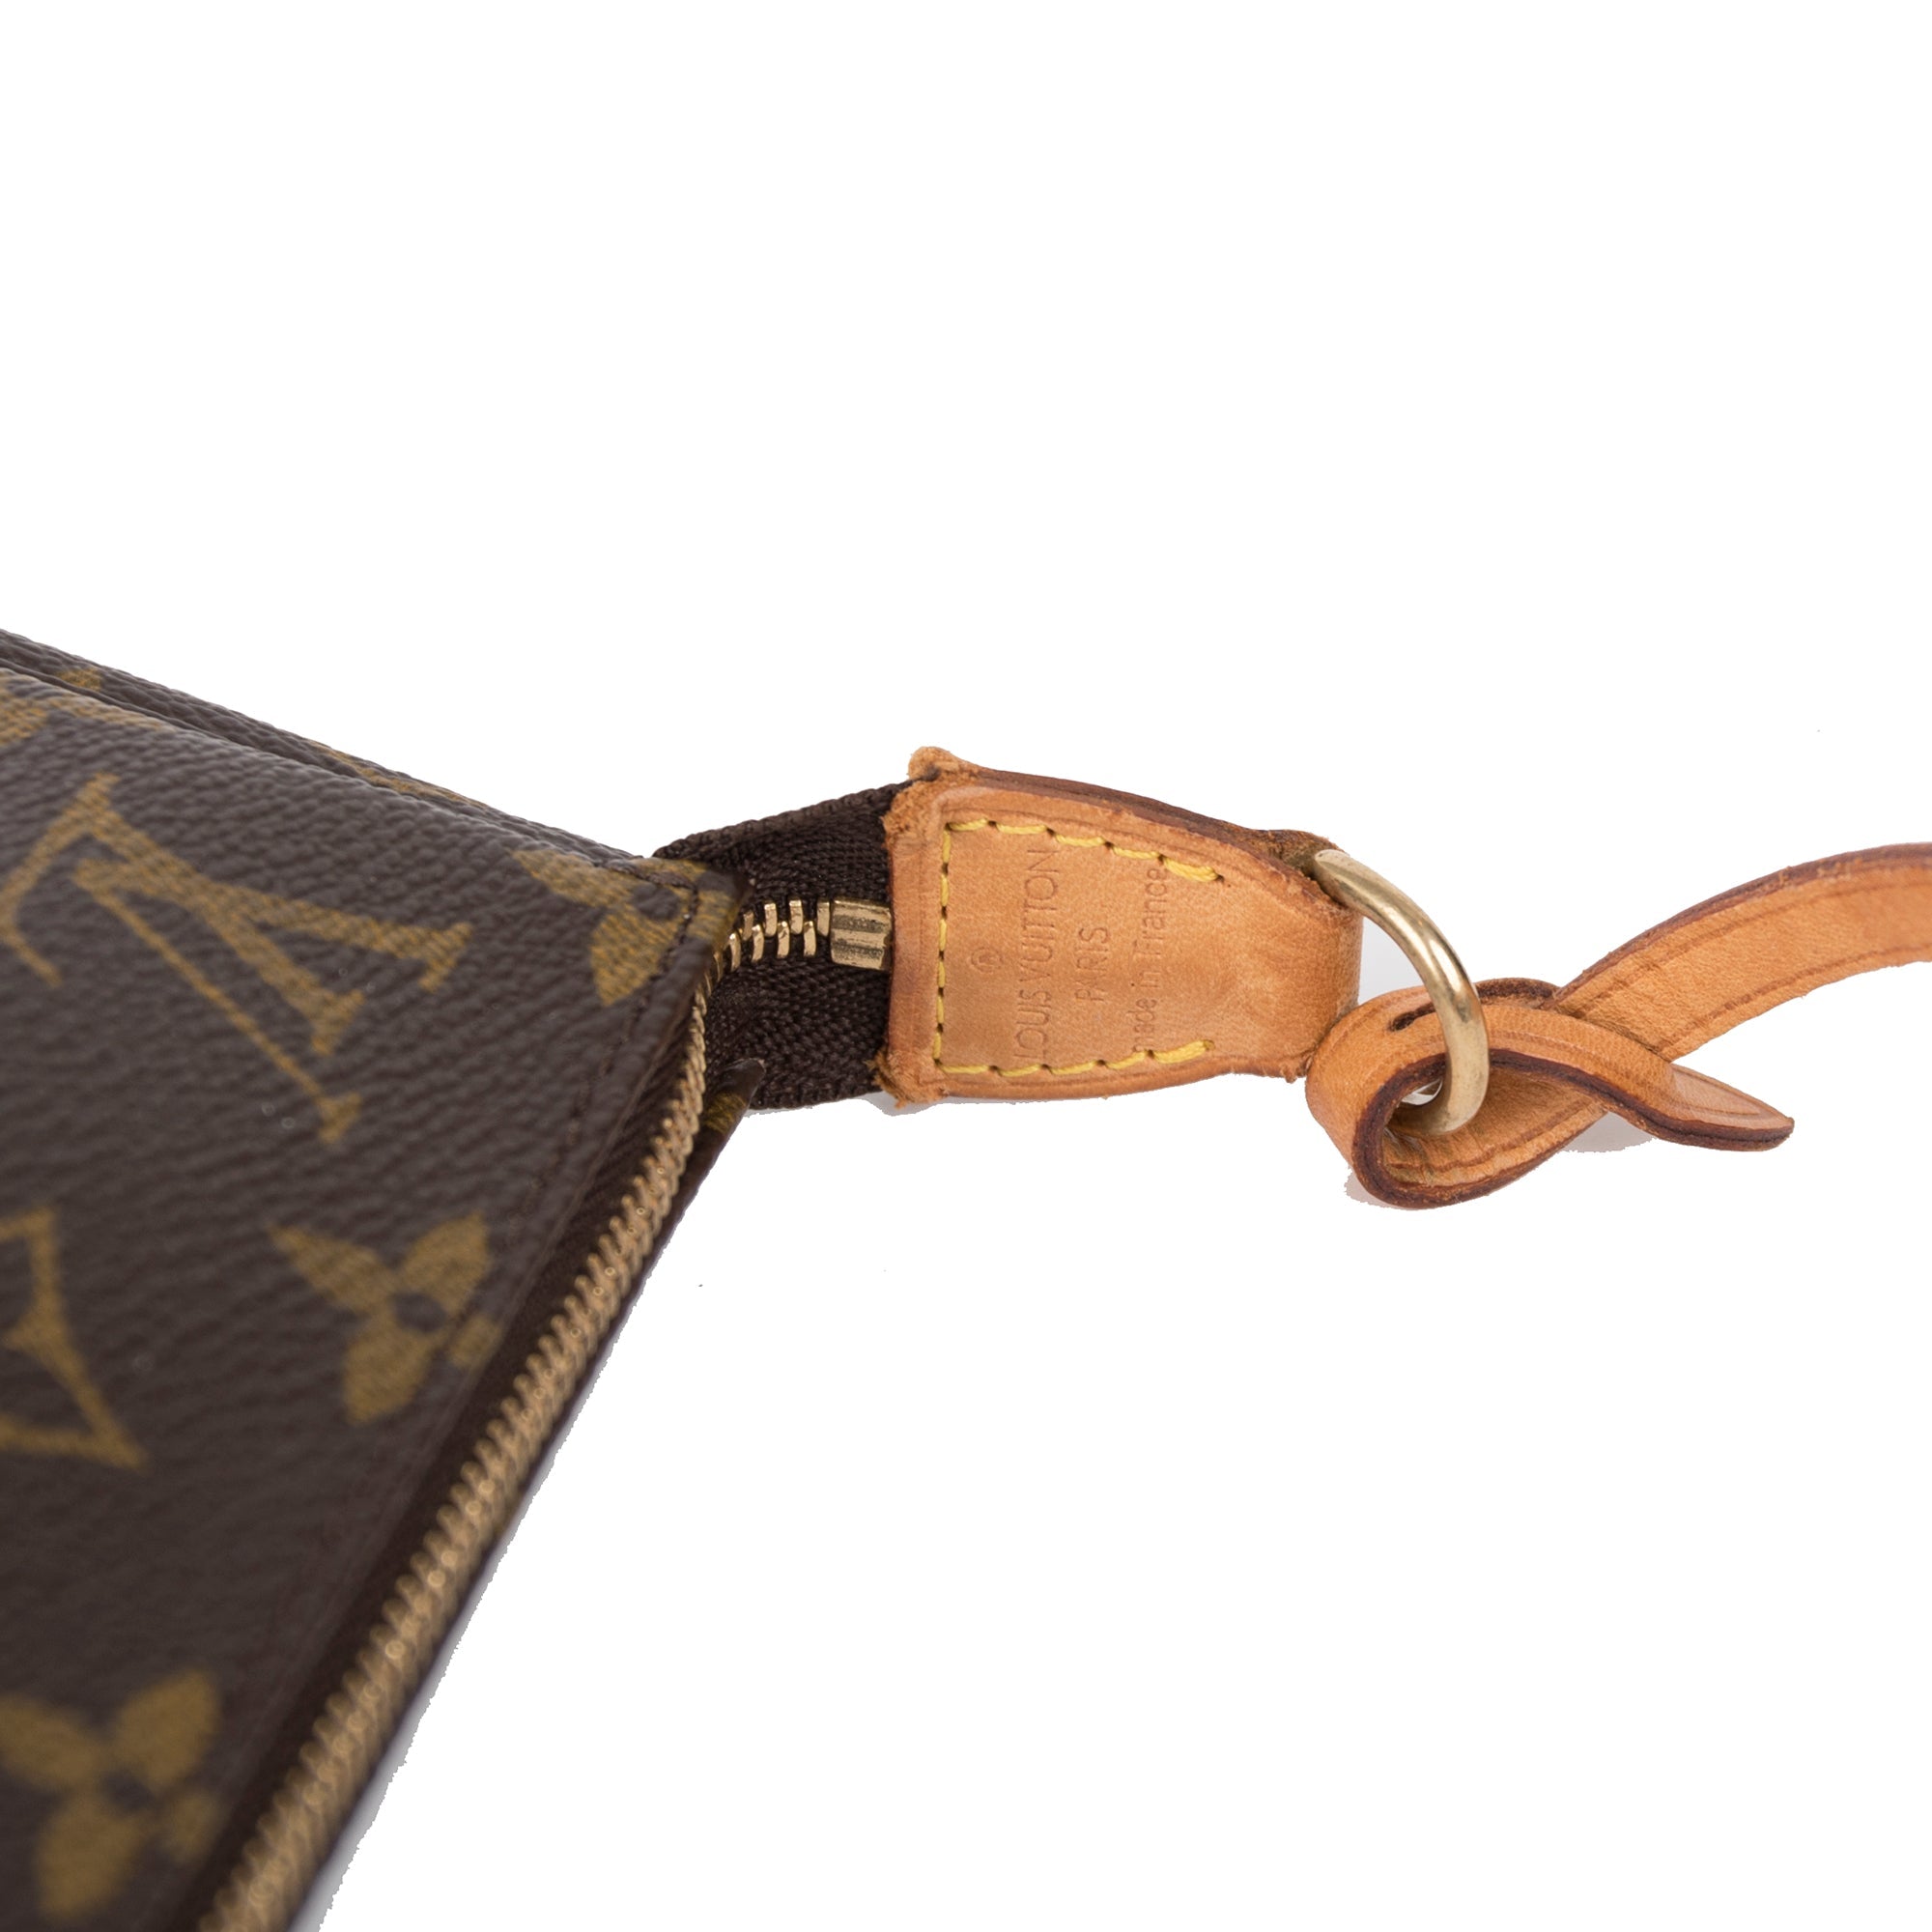 Louis Vuitton Perforated Pochette Plat – Oliver Jewellery